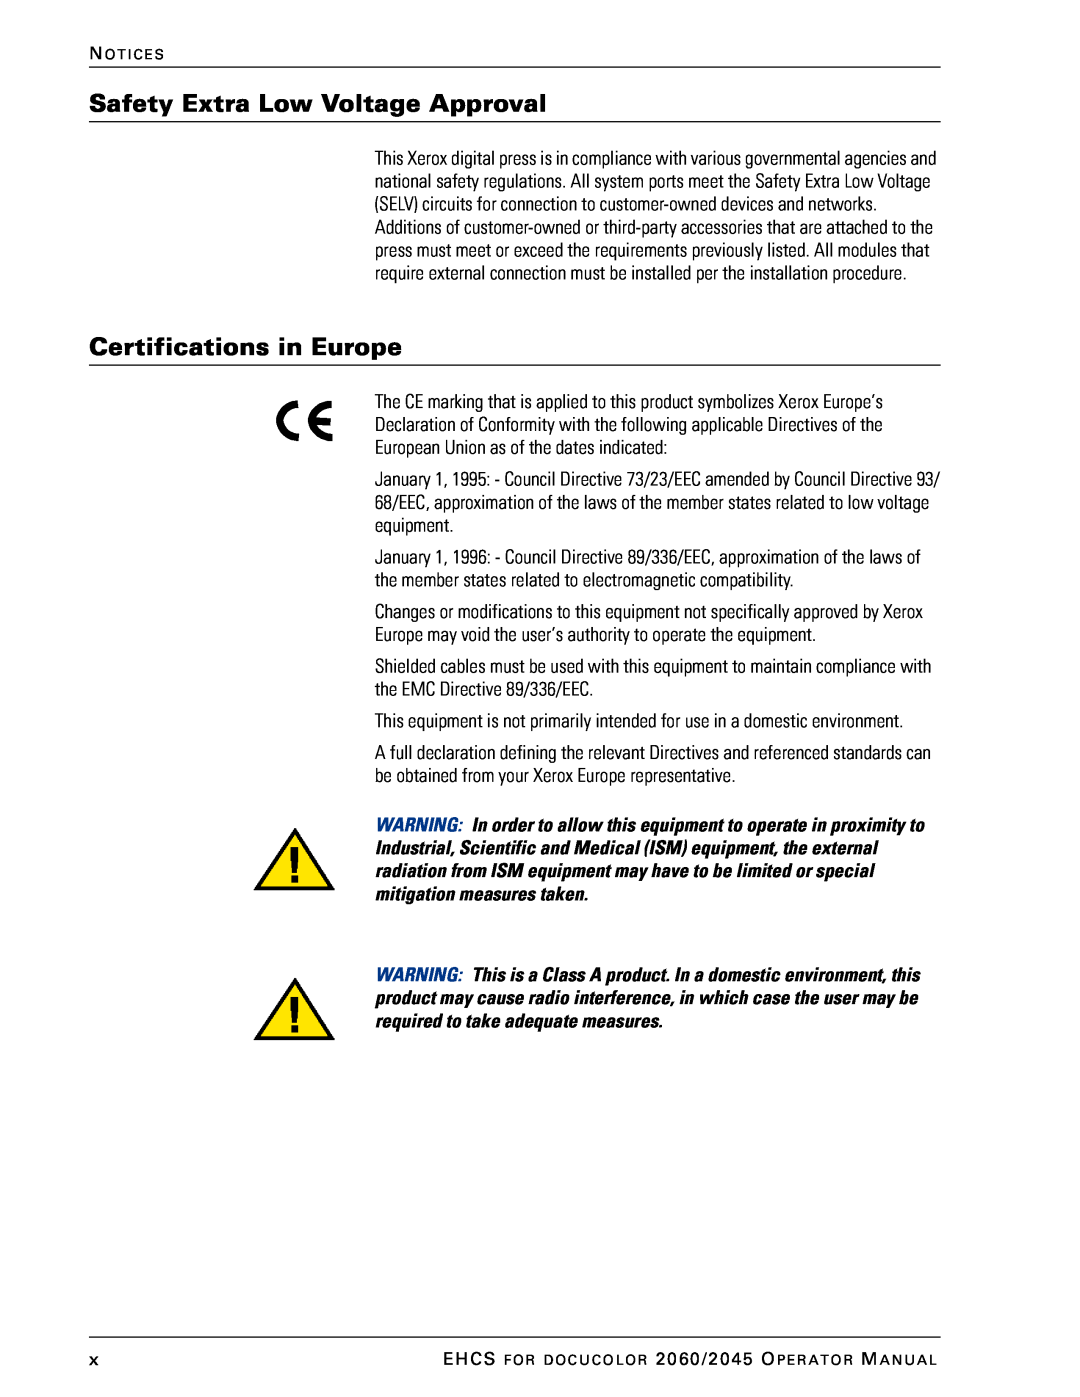 Xerox 2045 manual Safety Extra Low Voltage Approval, Certifications in Europe 